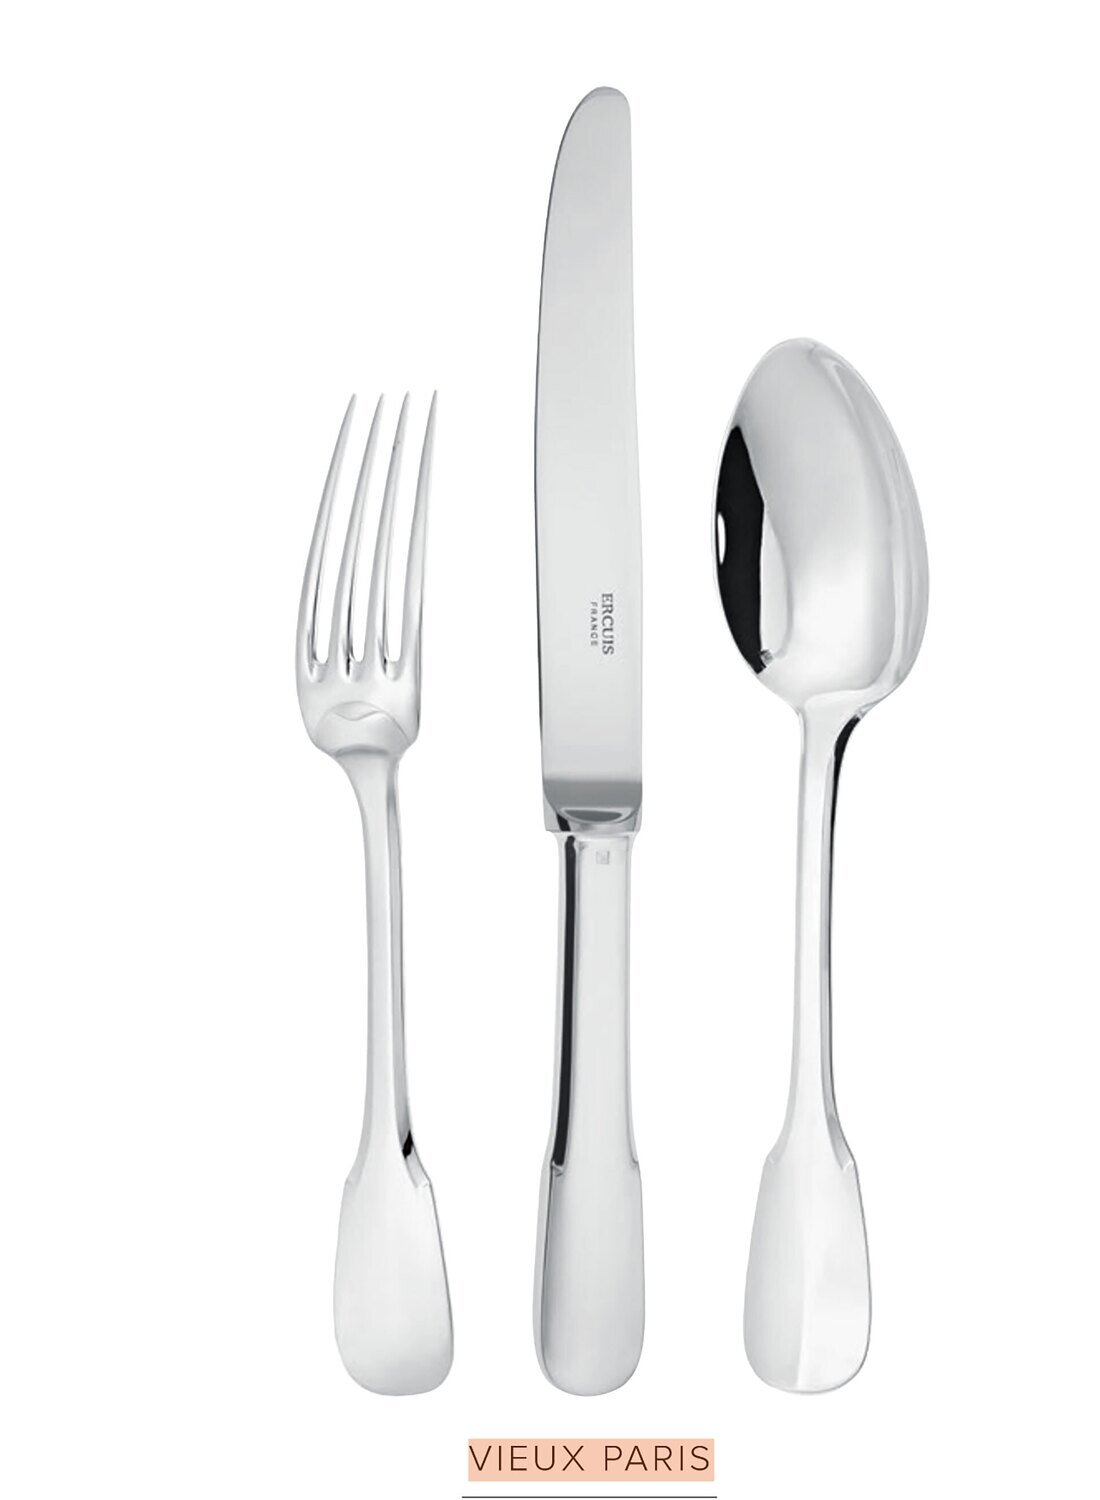 Ercuis Vieux Paris Pastry Fork Silver Plated F650140-20